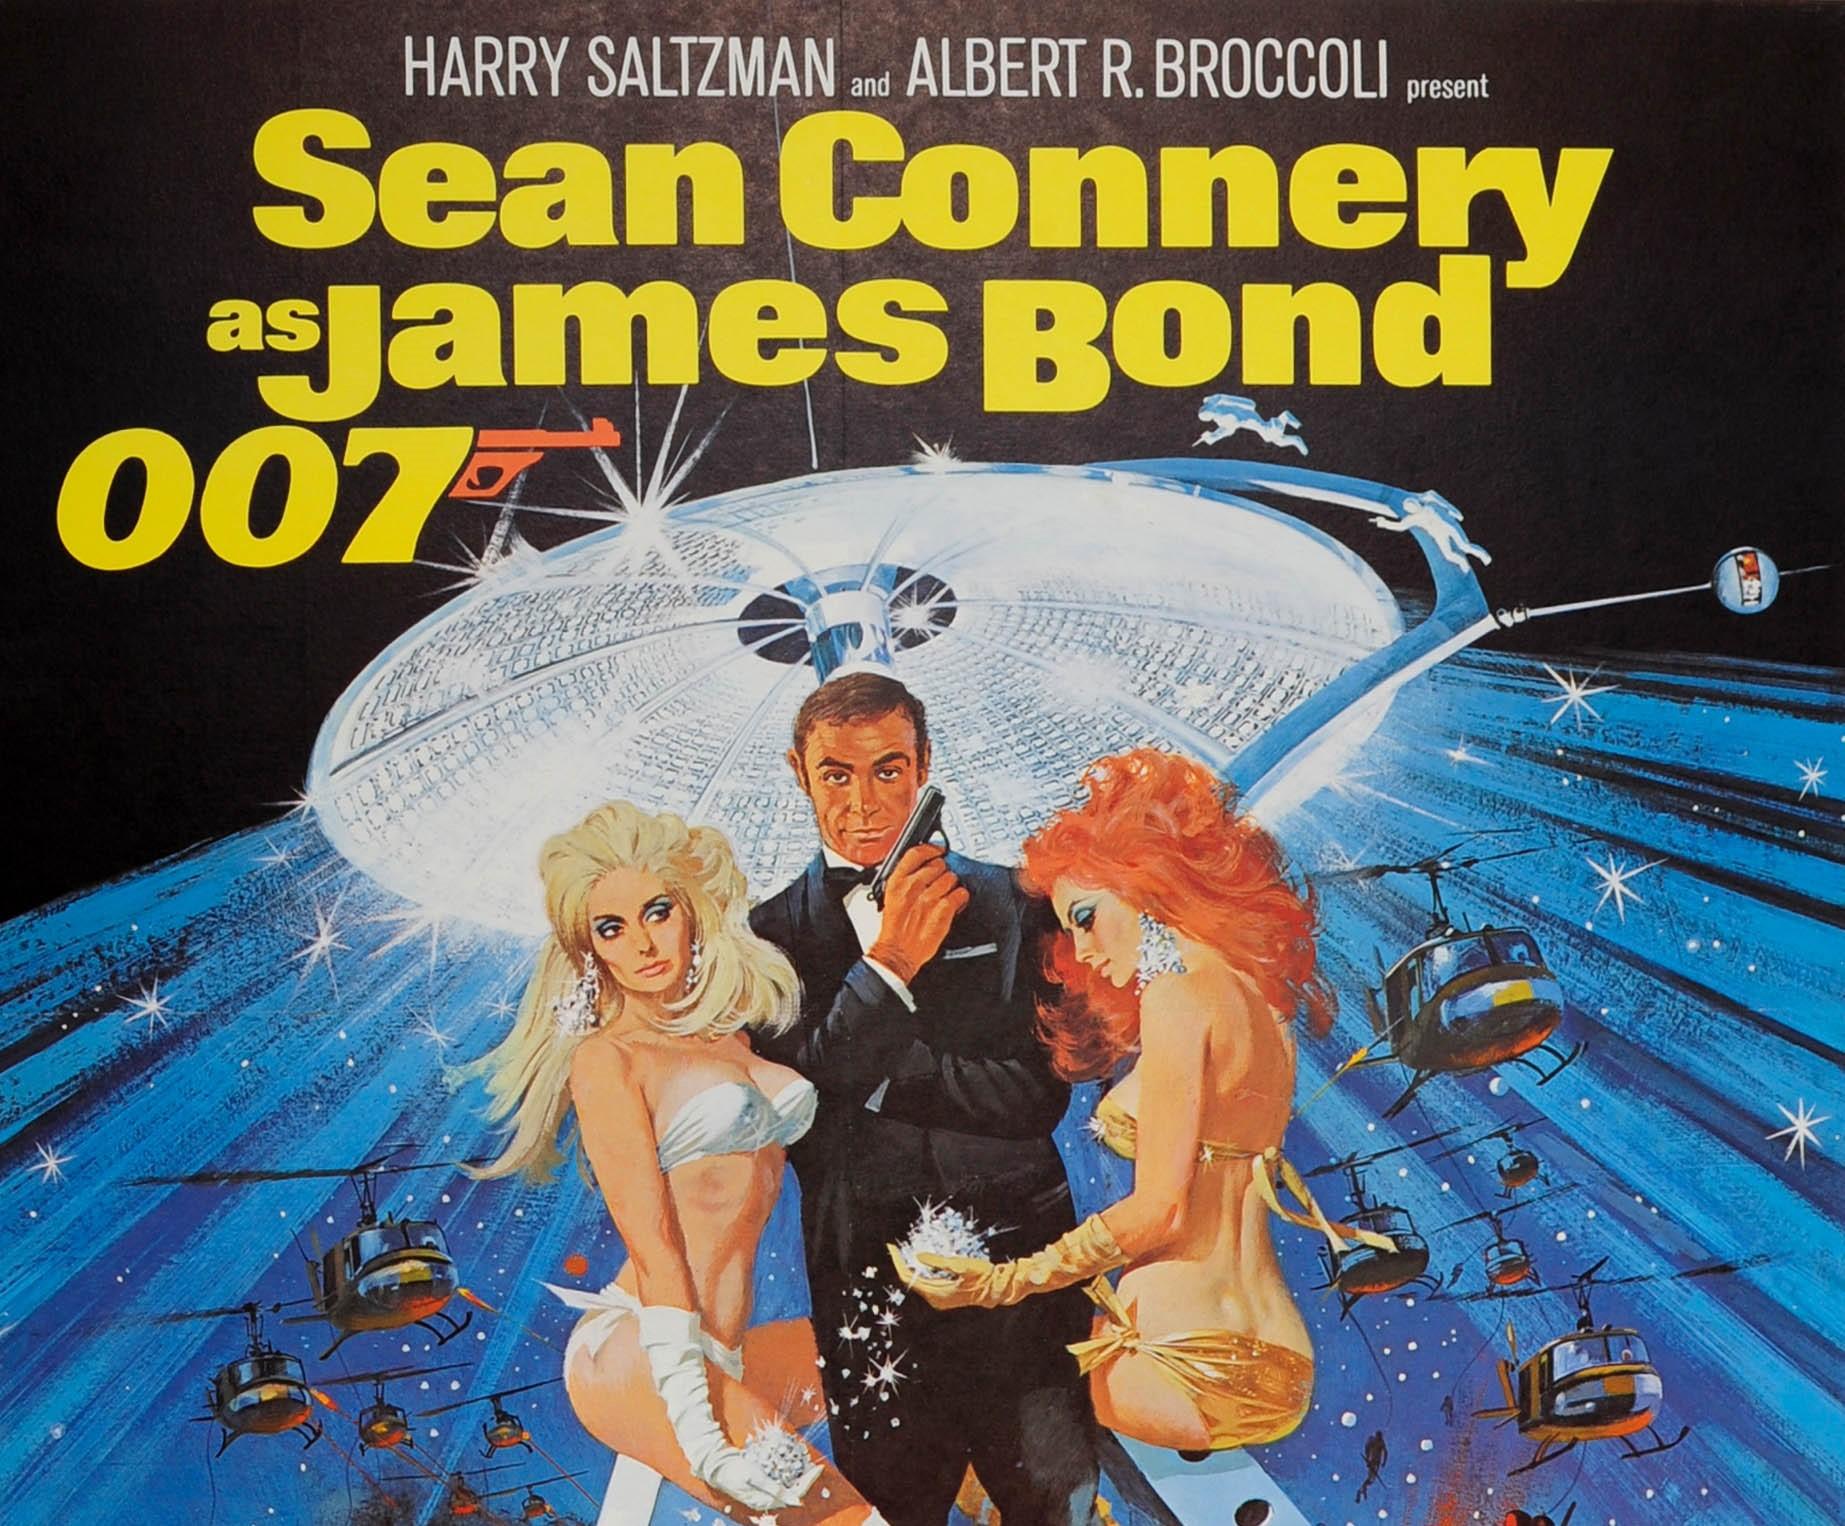 Original vintage three sheet movie poster for the classic 007 film Diamonds Are Forever starring Sean Connery as James Bond, Jill St. John as Tiffany Case, Charles Gray as Blofeld and Lana Wood as Plenty O'Toole. Artwork by the American artist